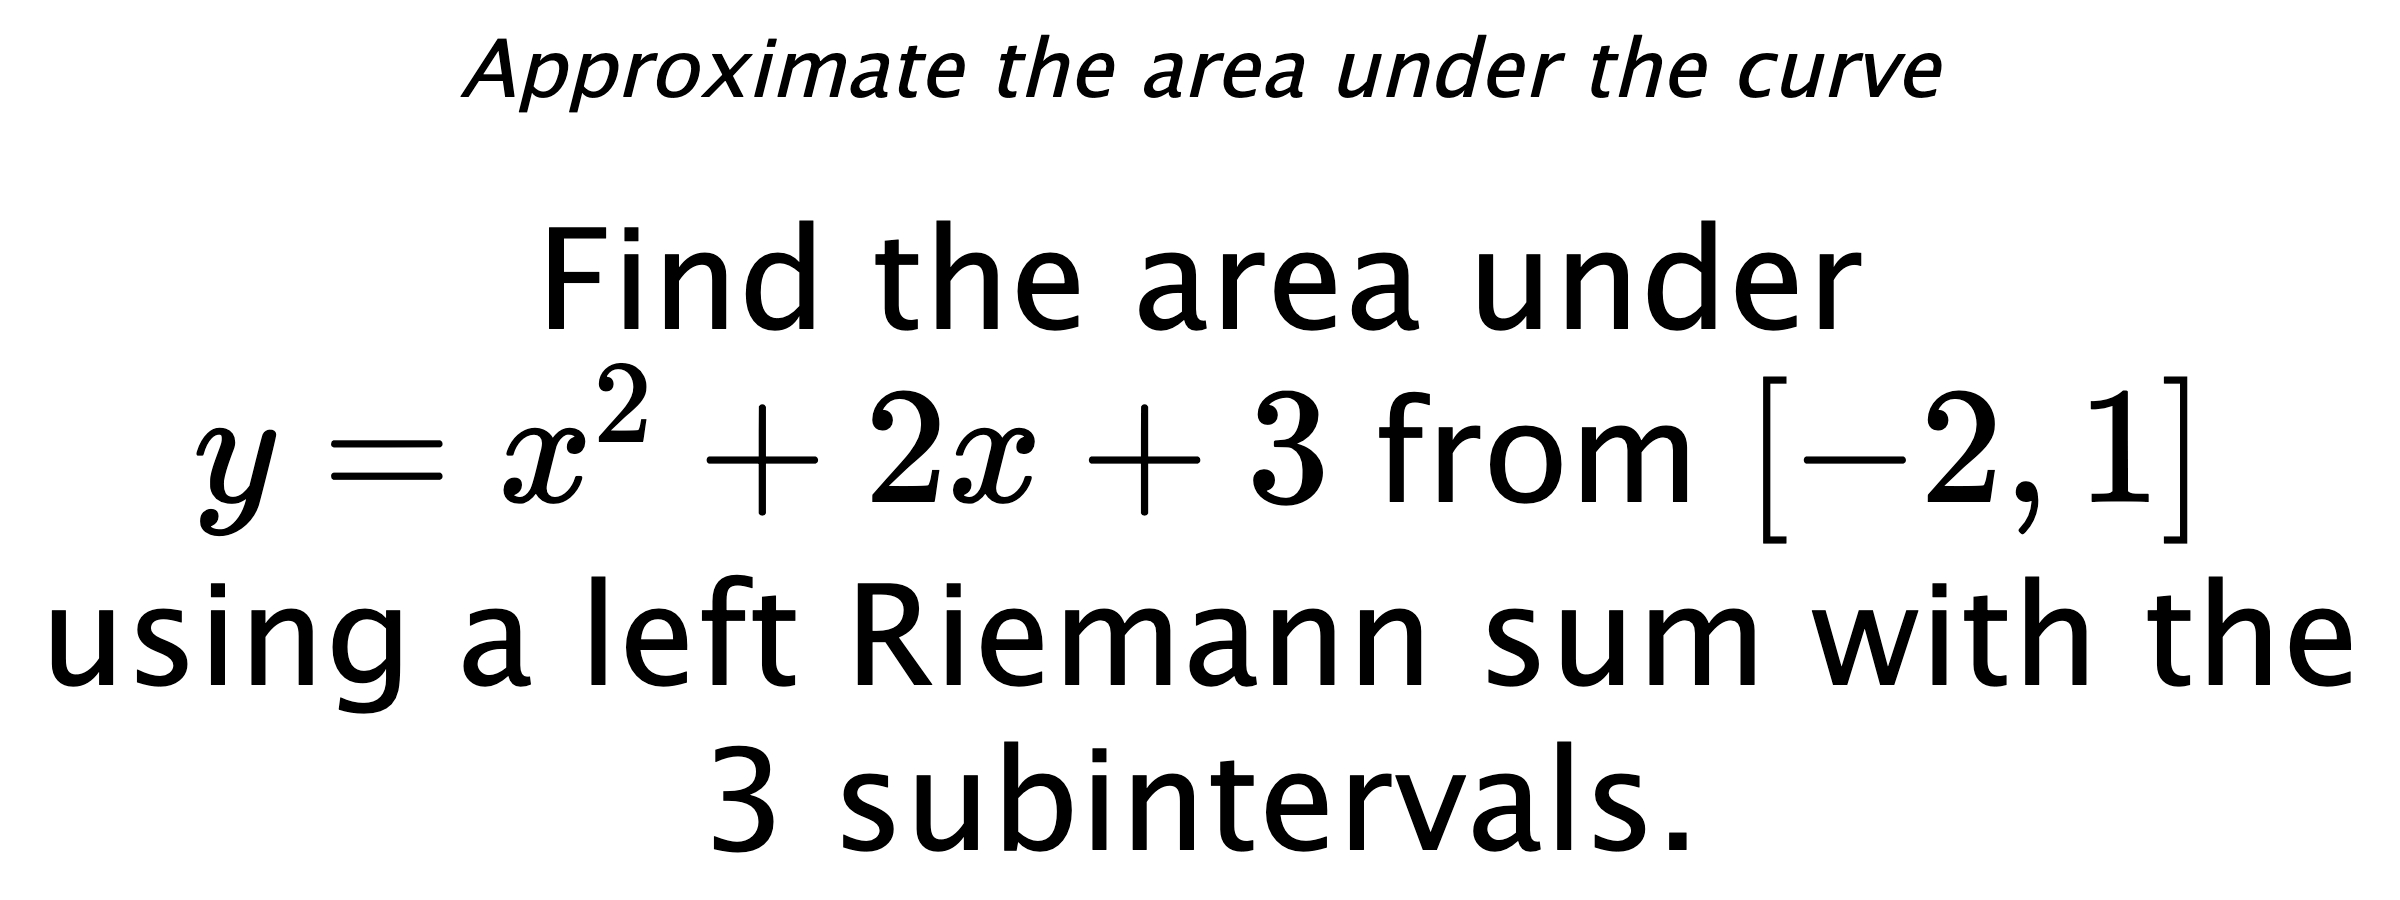 Approximate the area under the curve Find the area under $ y=x^2+2x+3 $ from $ [-2,1] $ using a left Riemann sum with the 3 subintervals.